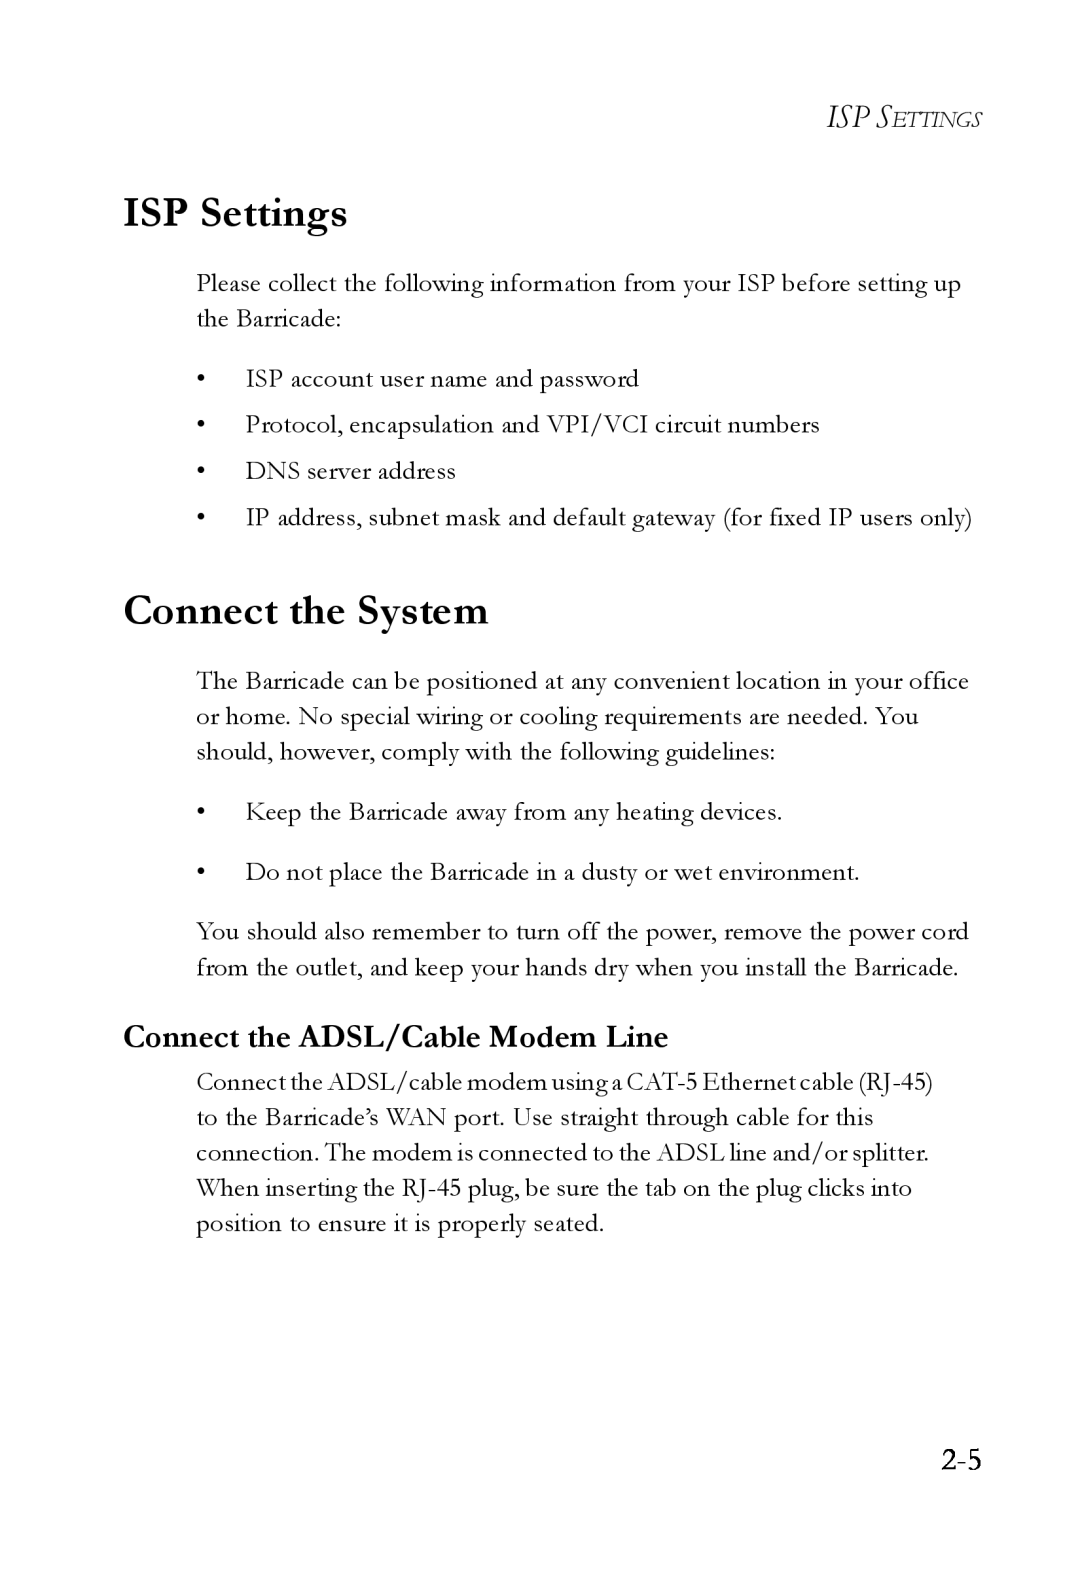 SMC Networks SMCWBR14T-G manual ISP Settings, Connect the System, Connect the ADSL/Cable Modem Line 